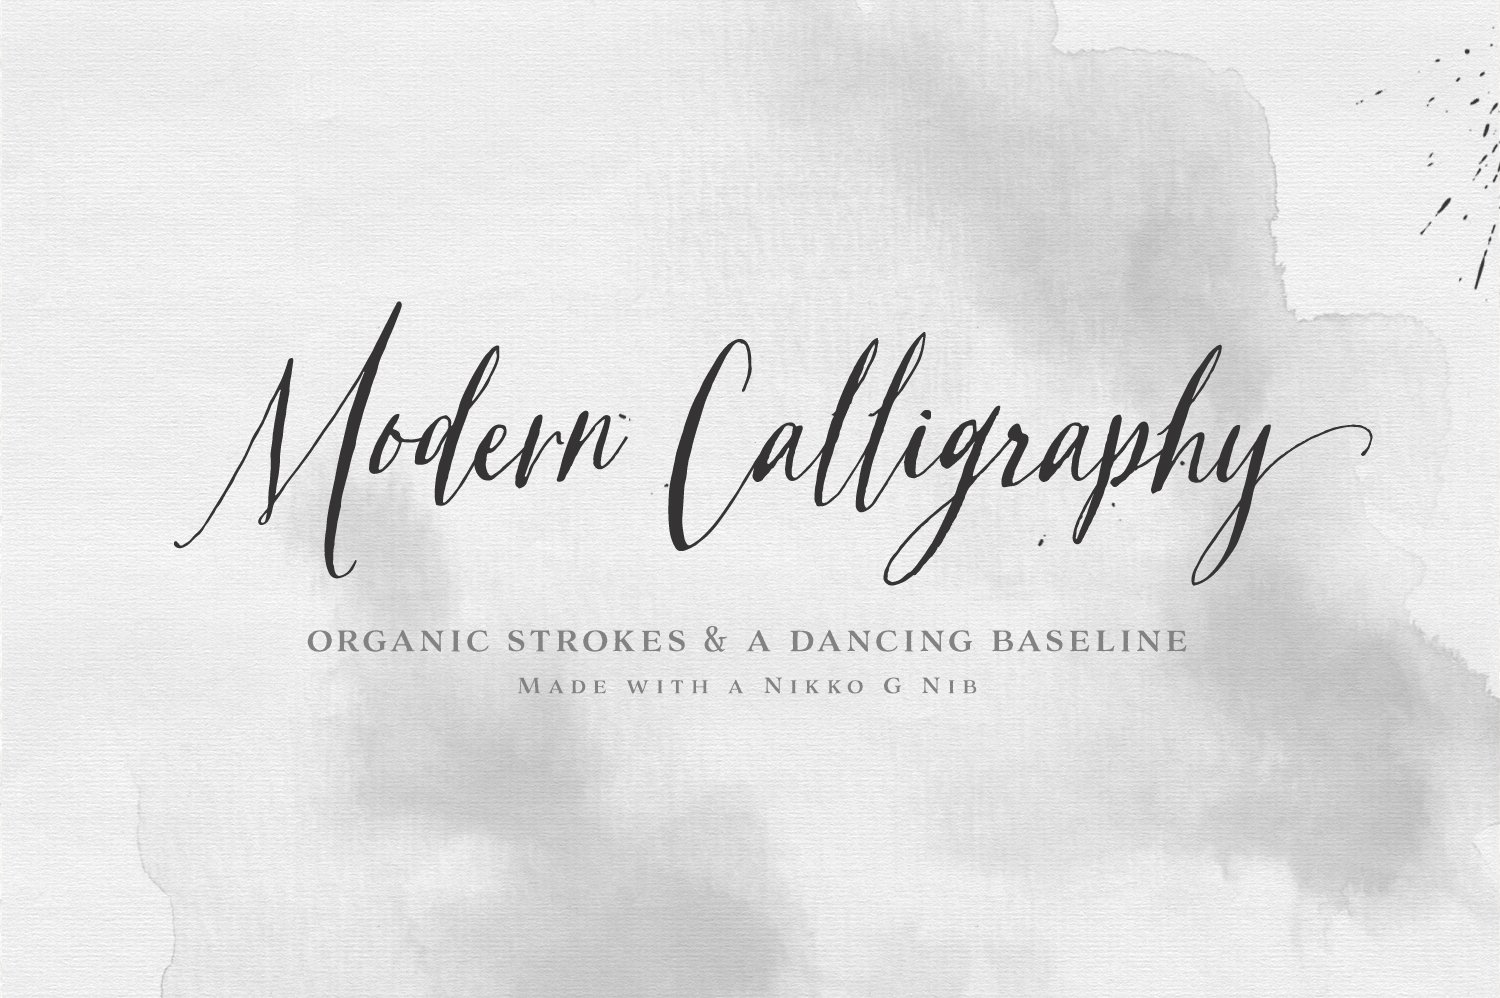 Paperchaser Modern Calligraphy